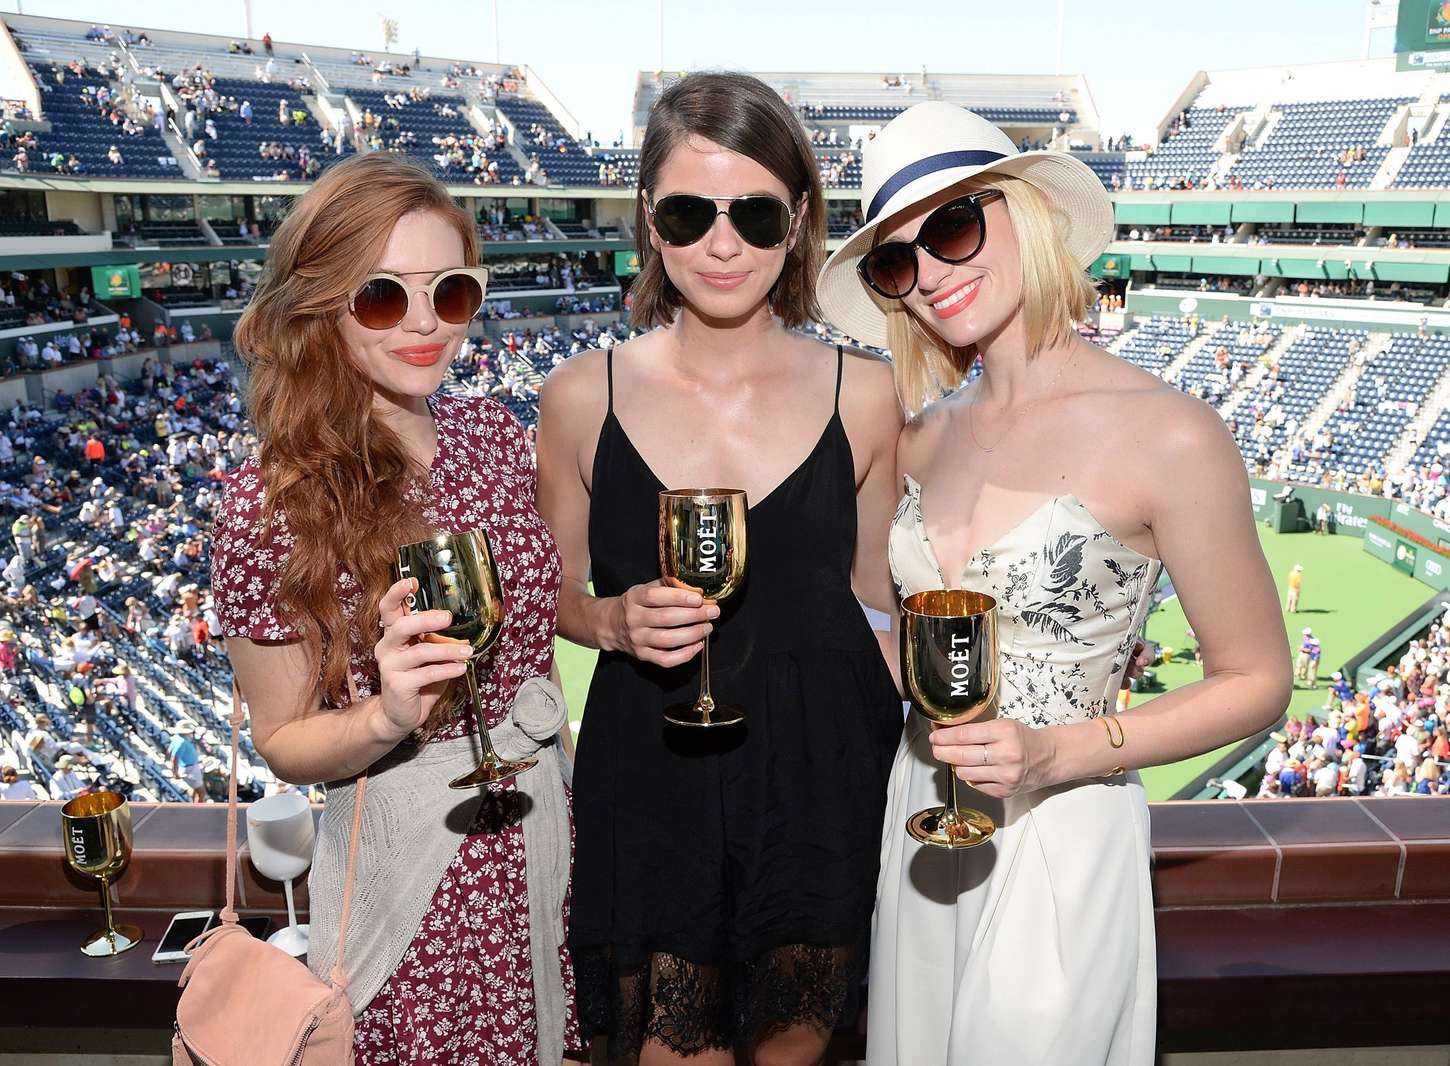 Holland-Roden_-The-Moet-and-Chandon-Suite-at-2015-BNP-Paribas-Open--11.jpg